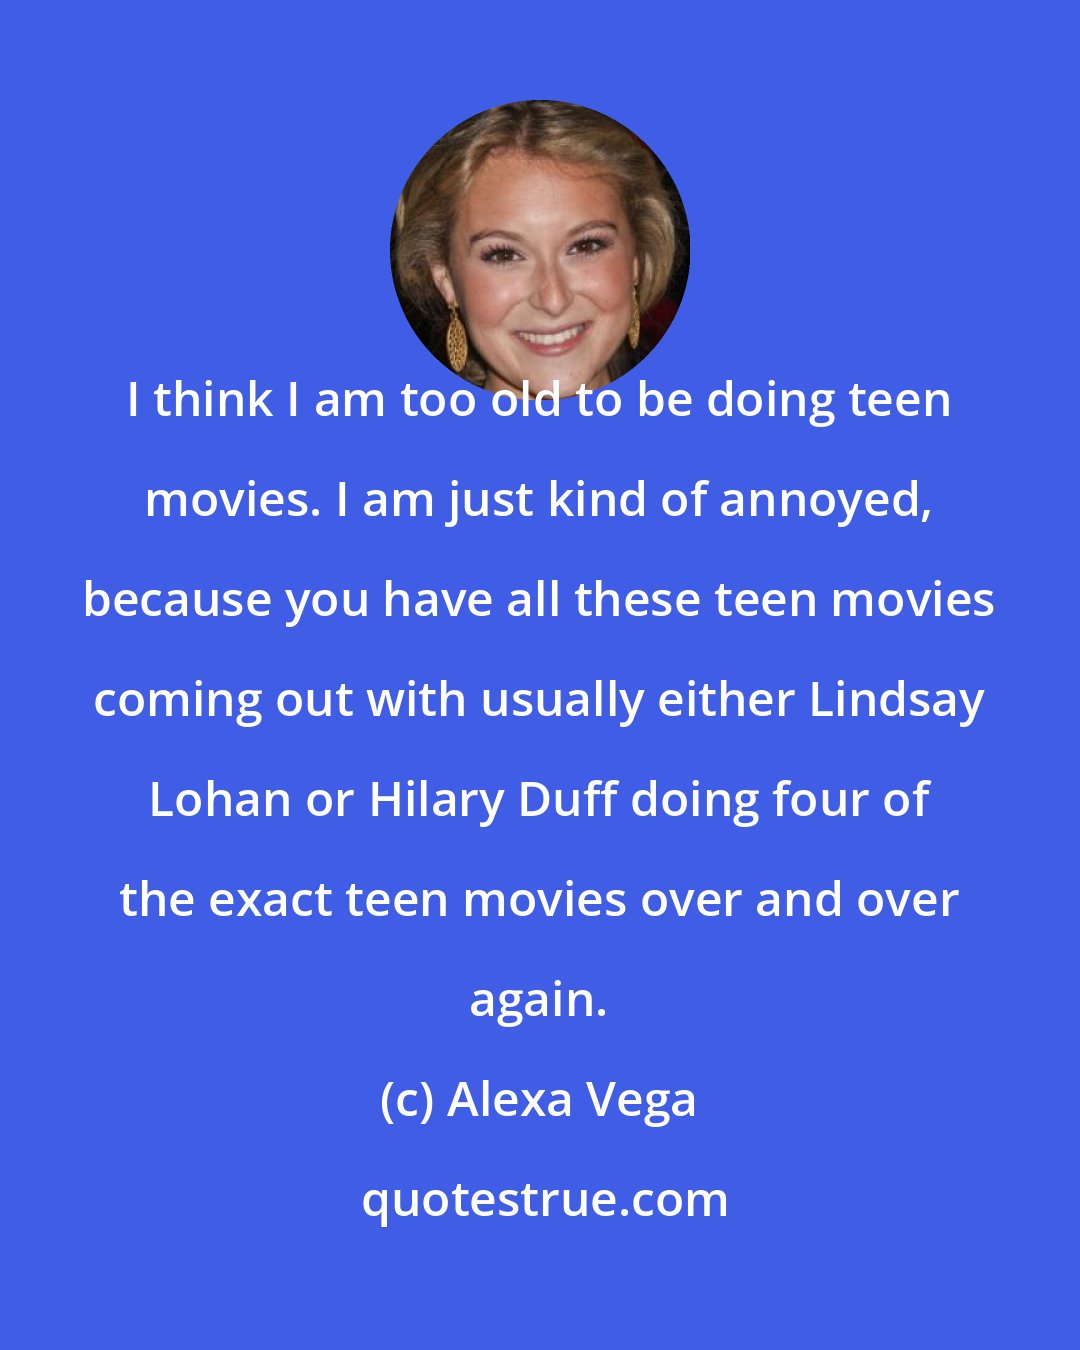 Alexa Vega: I think I am too old to be doing teen movies. I am just kind of annoyed, because you have all these teen movies coming out with usually either Lindsay Lohan or Hilary Duff doing four of the exact teen movies over and over again.